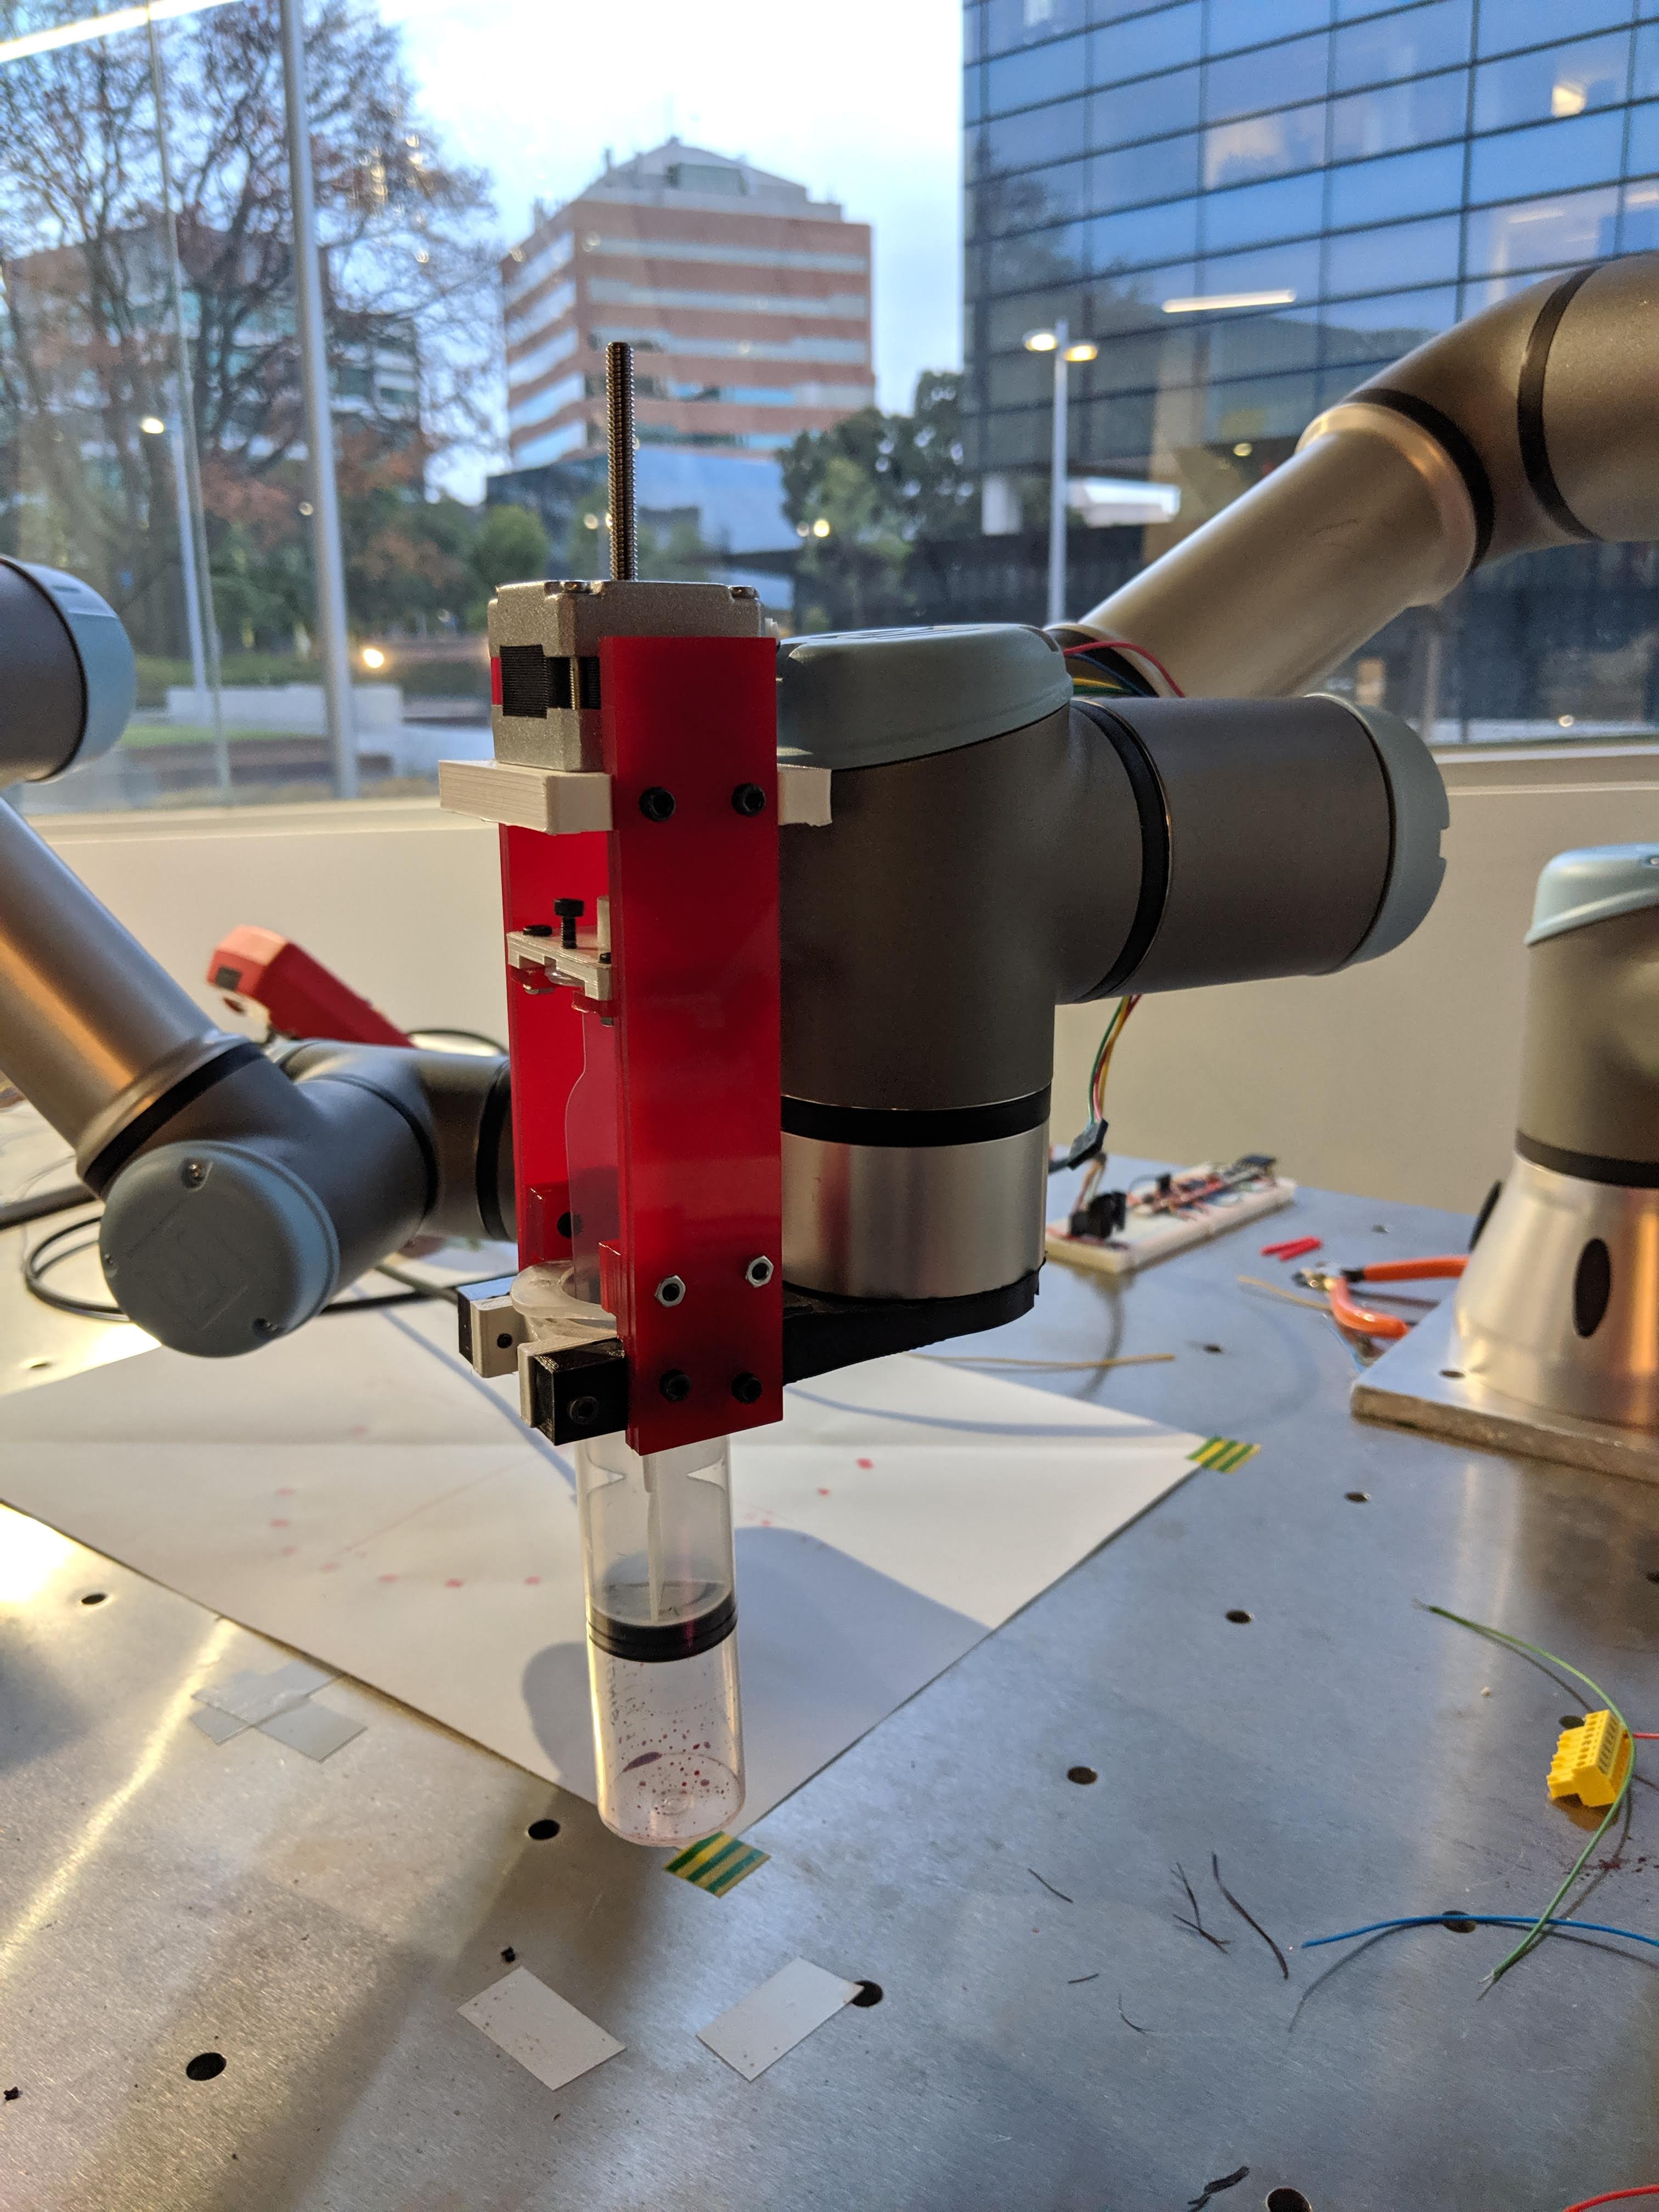 Robot Syringe attached to arm